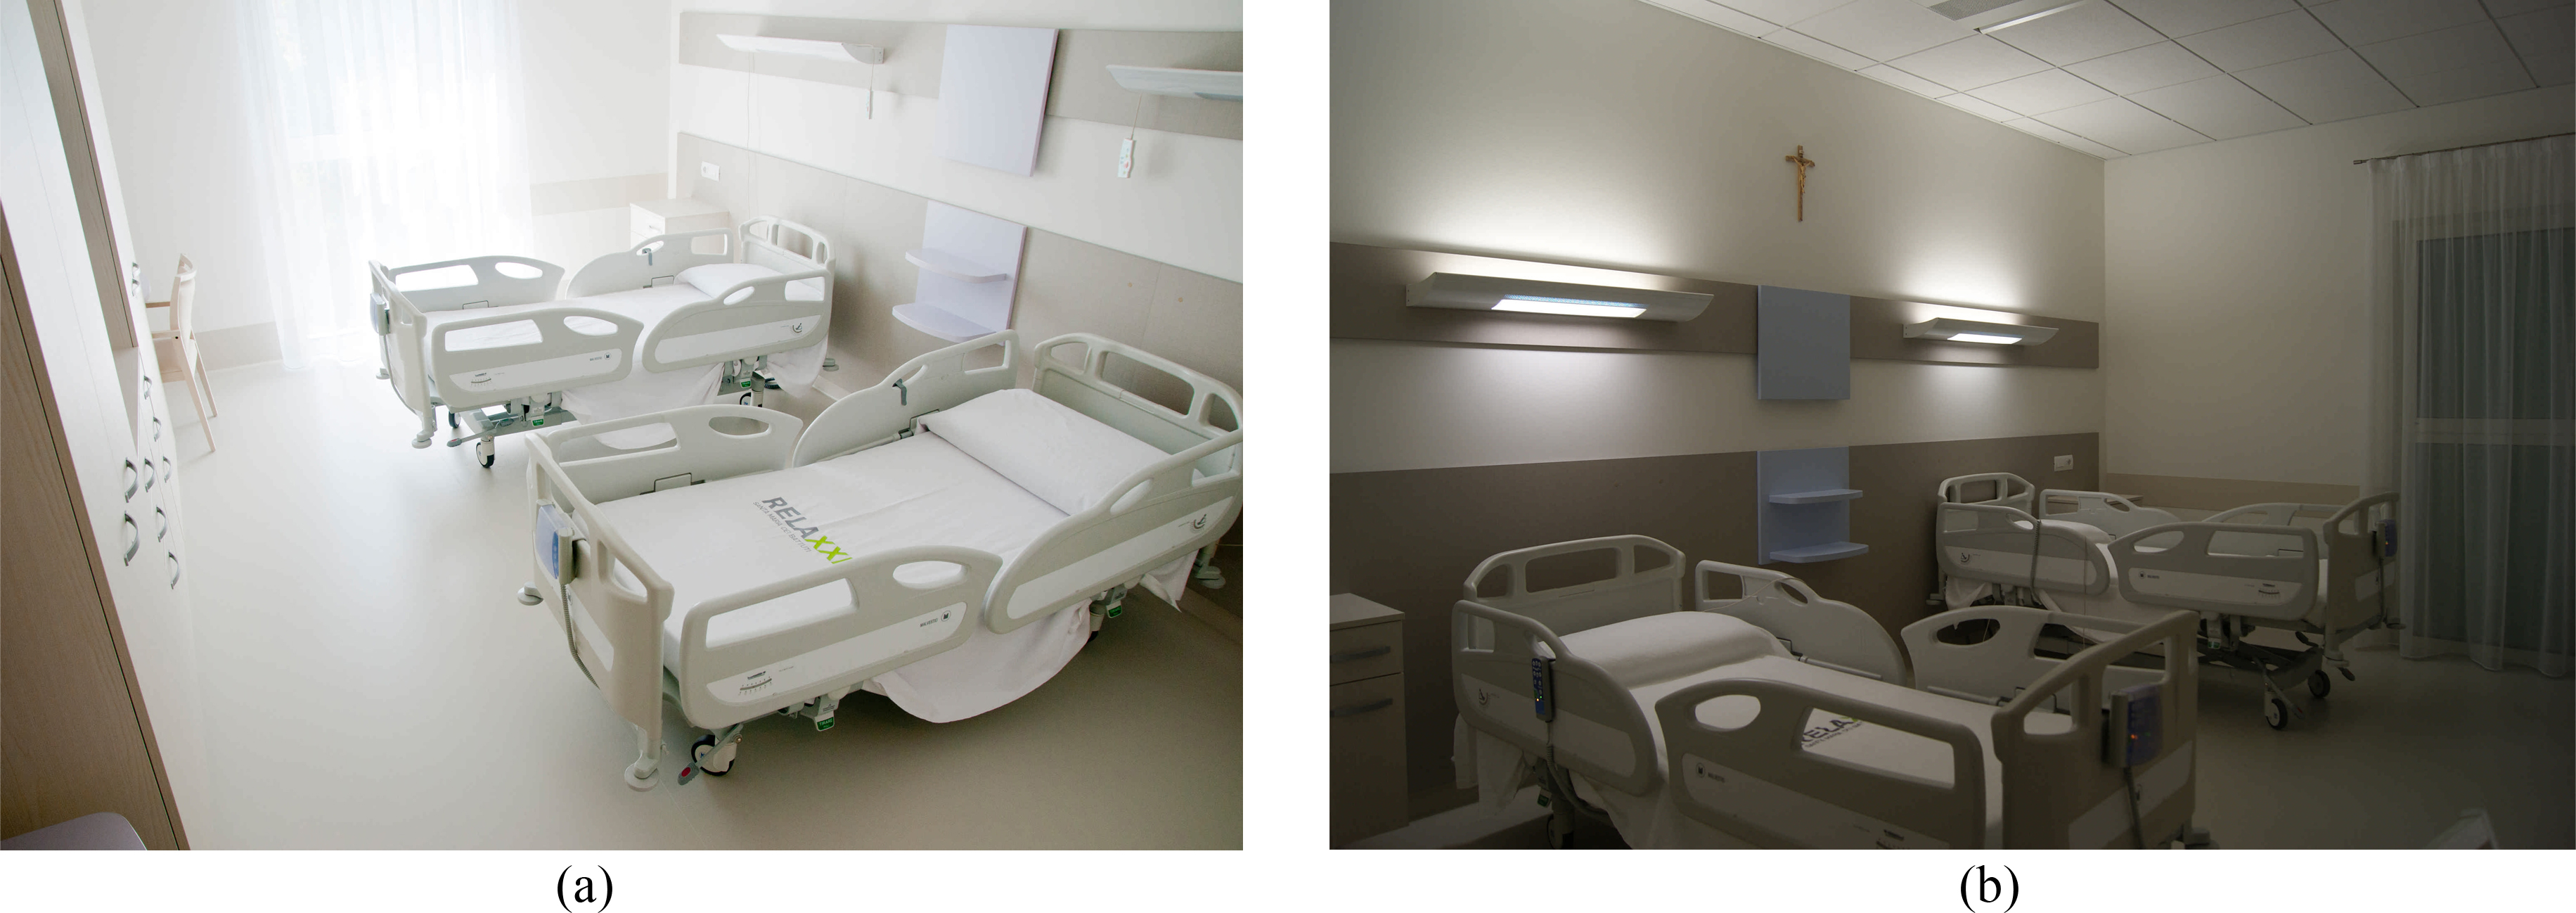 Patient room at current state, (a) during daylight and (b) in artificial light conditions.